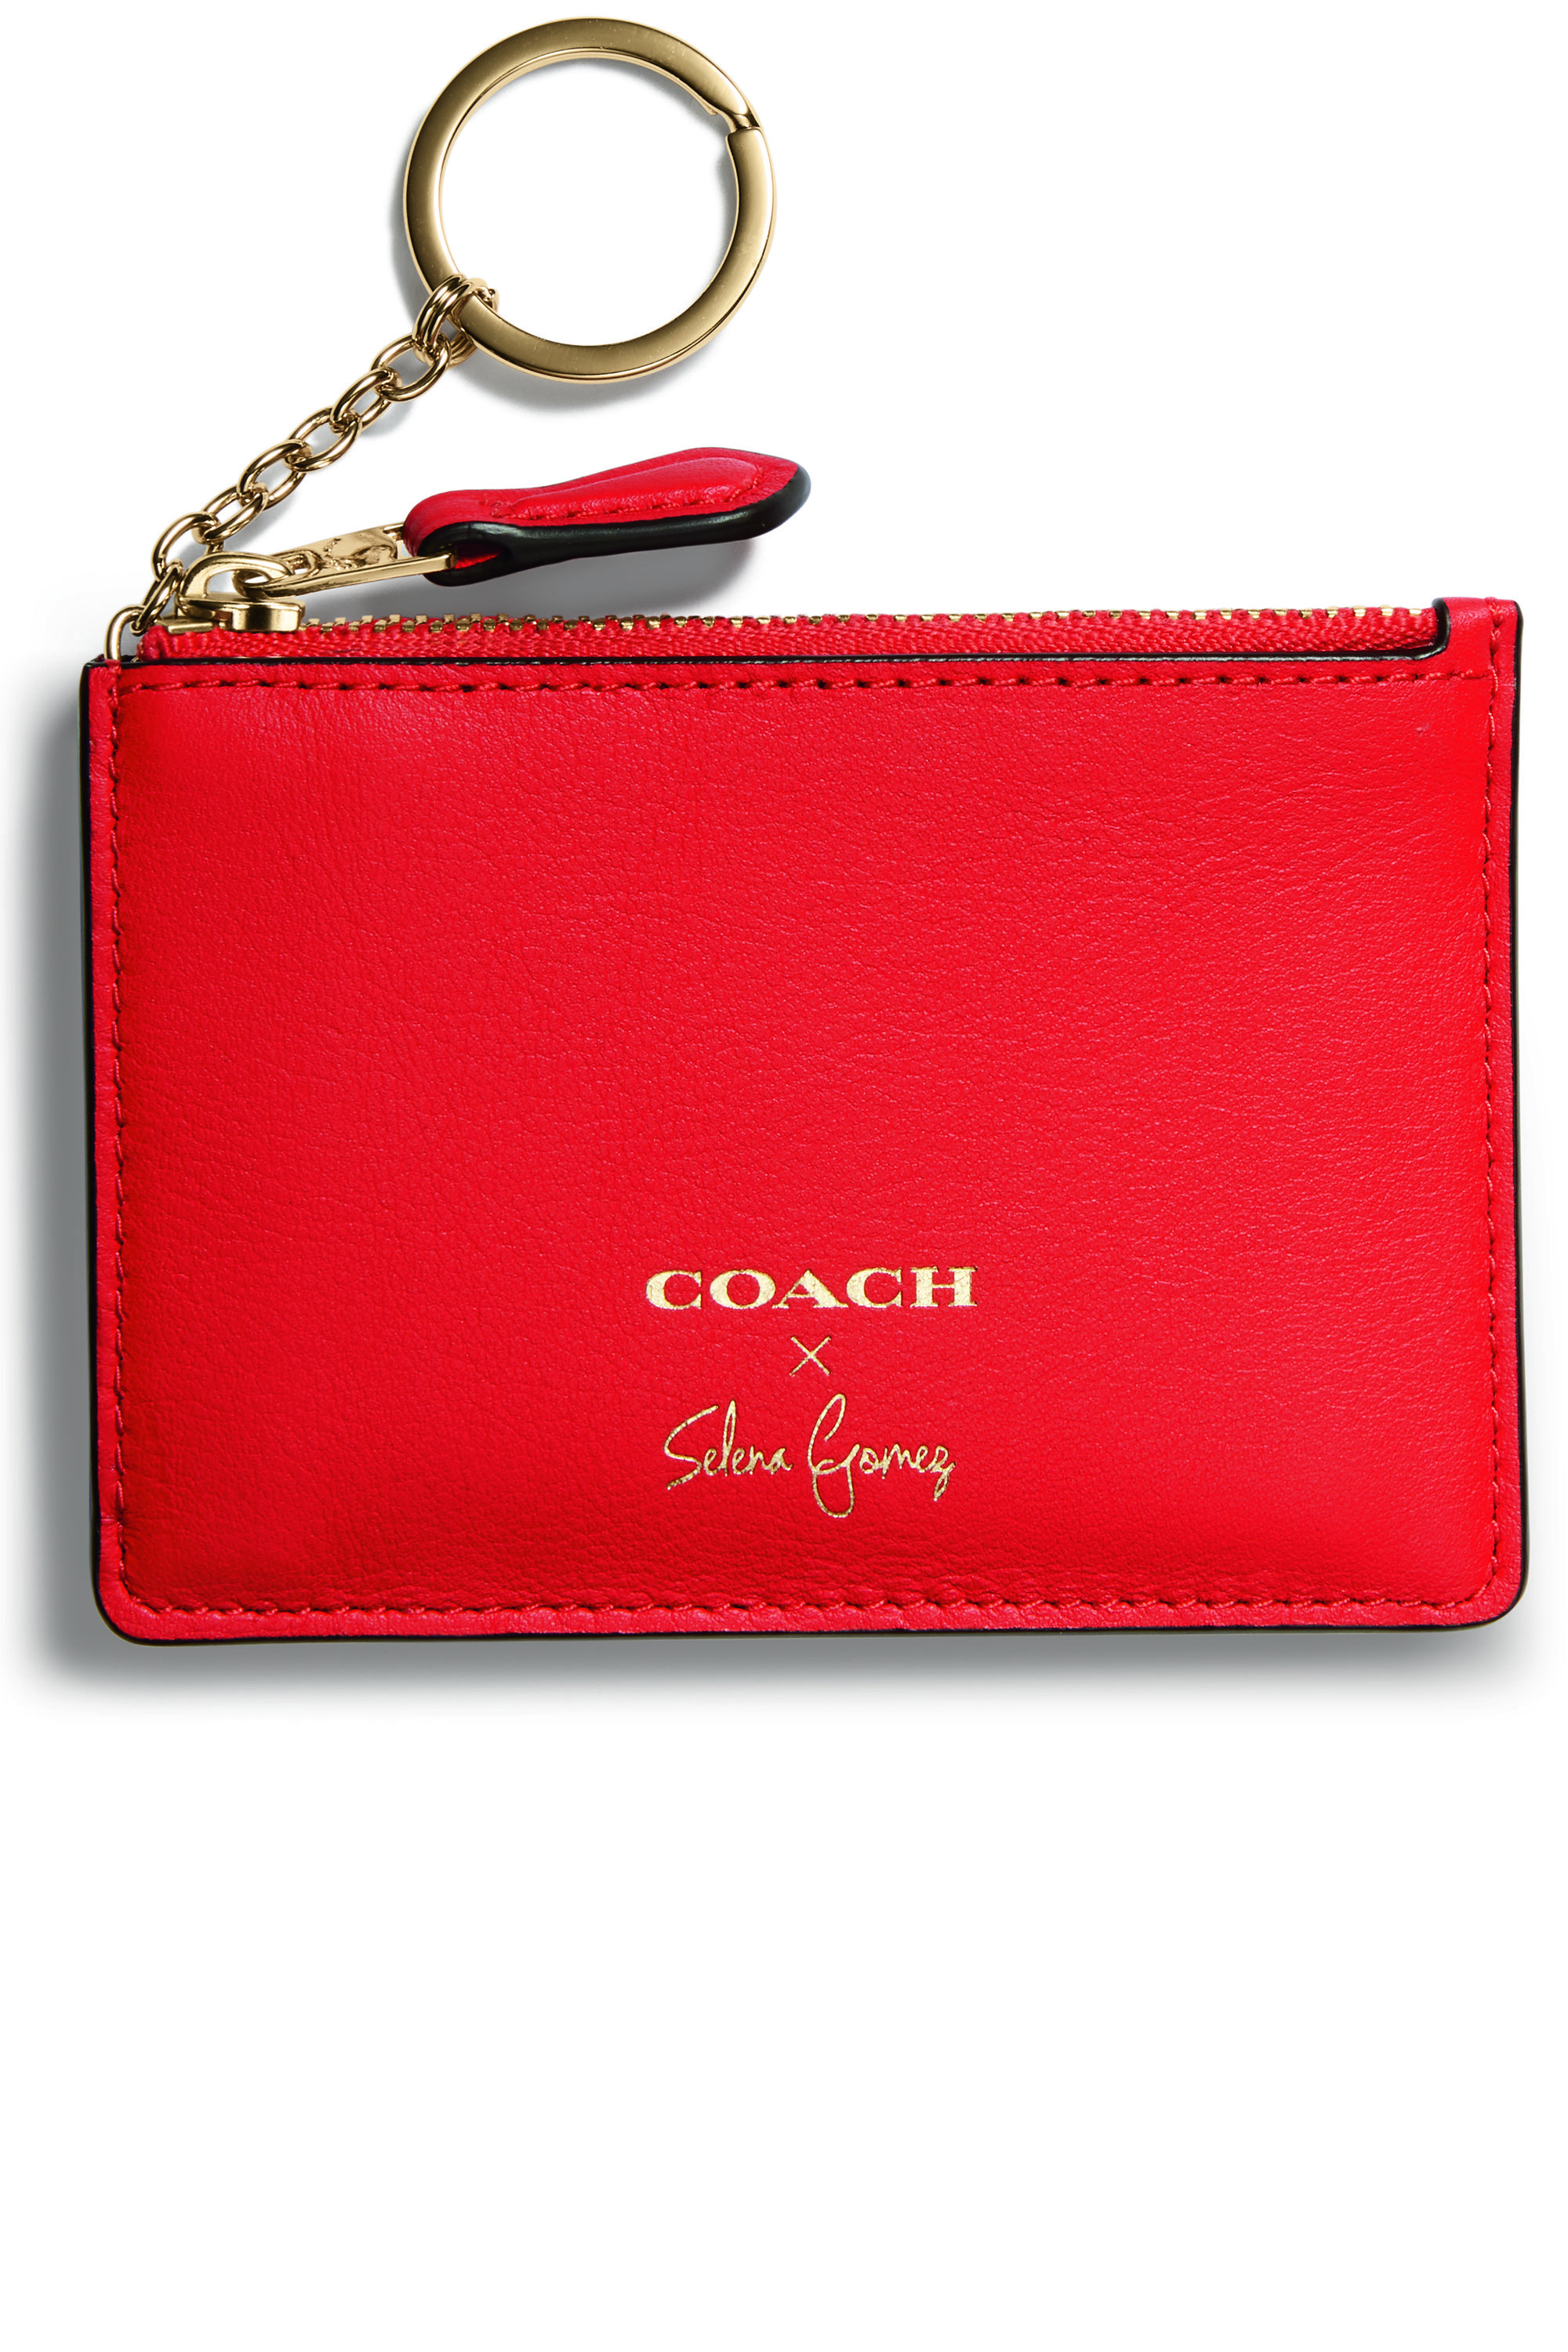 See All 11 Leather Goods From the Coach x Selena Gomez Collaboration -  Fashionista